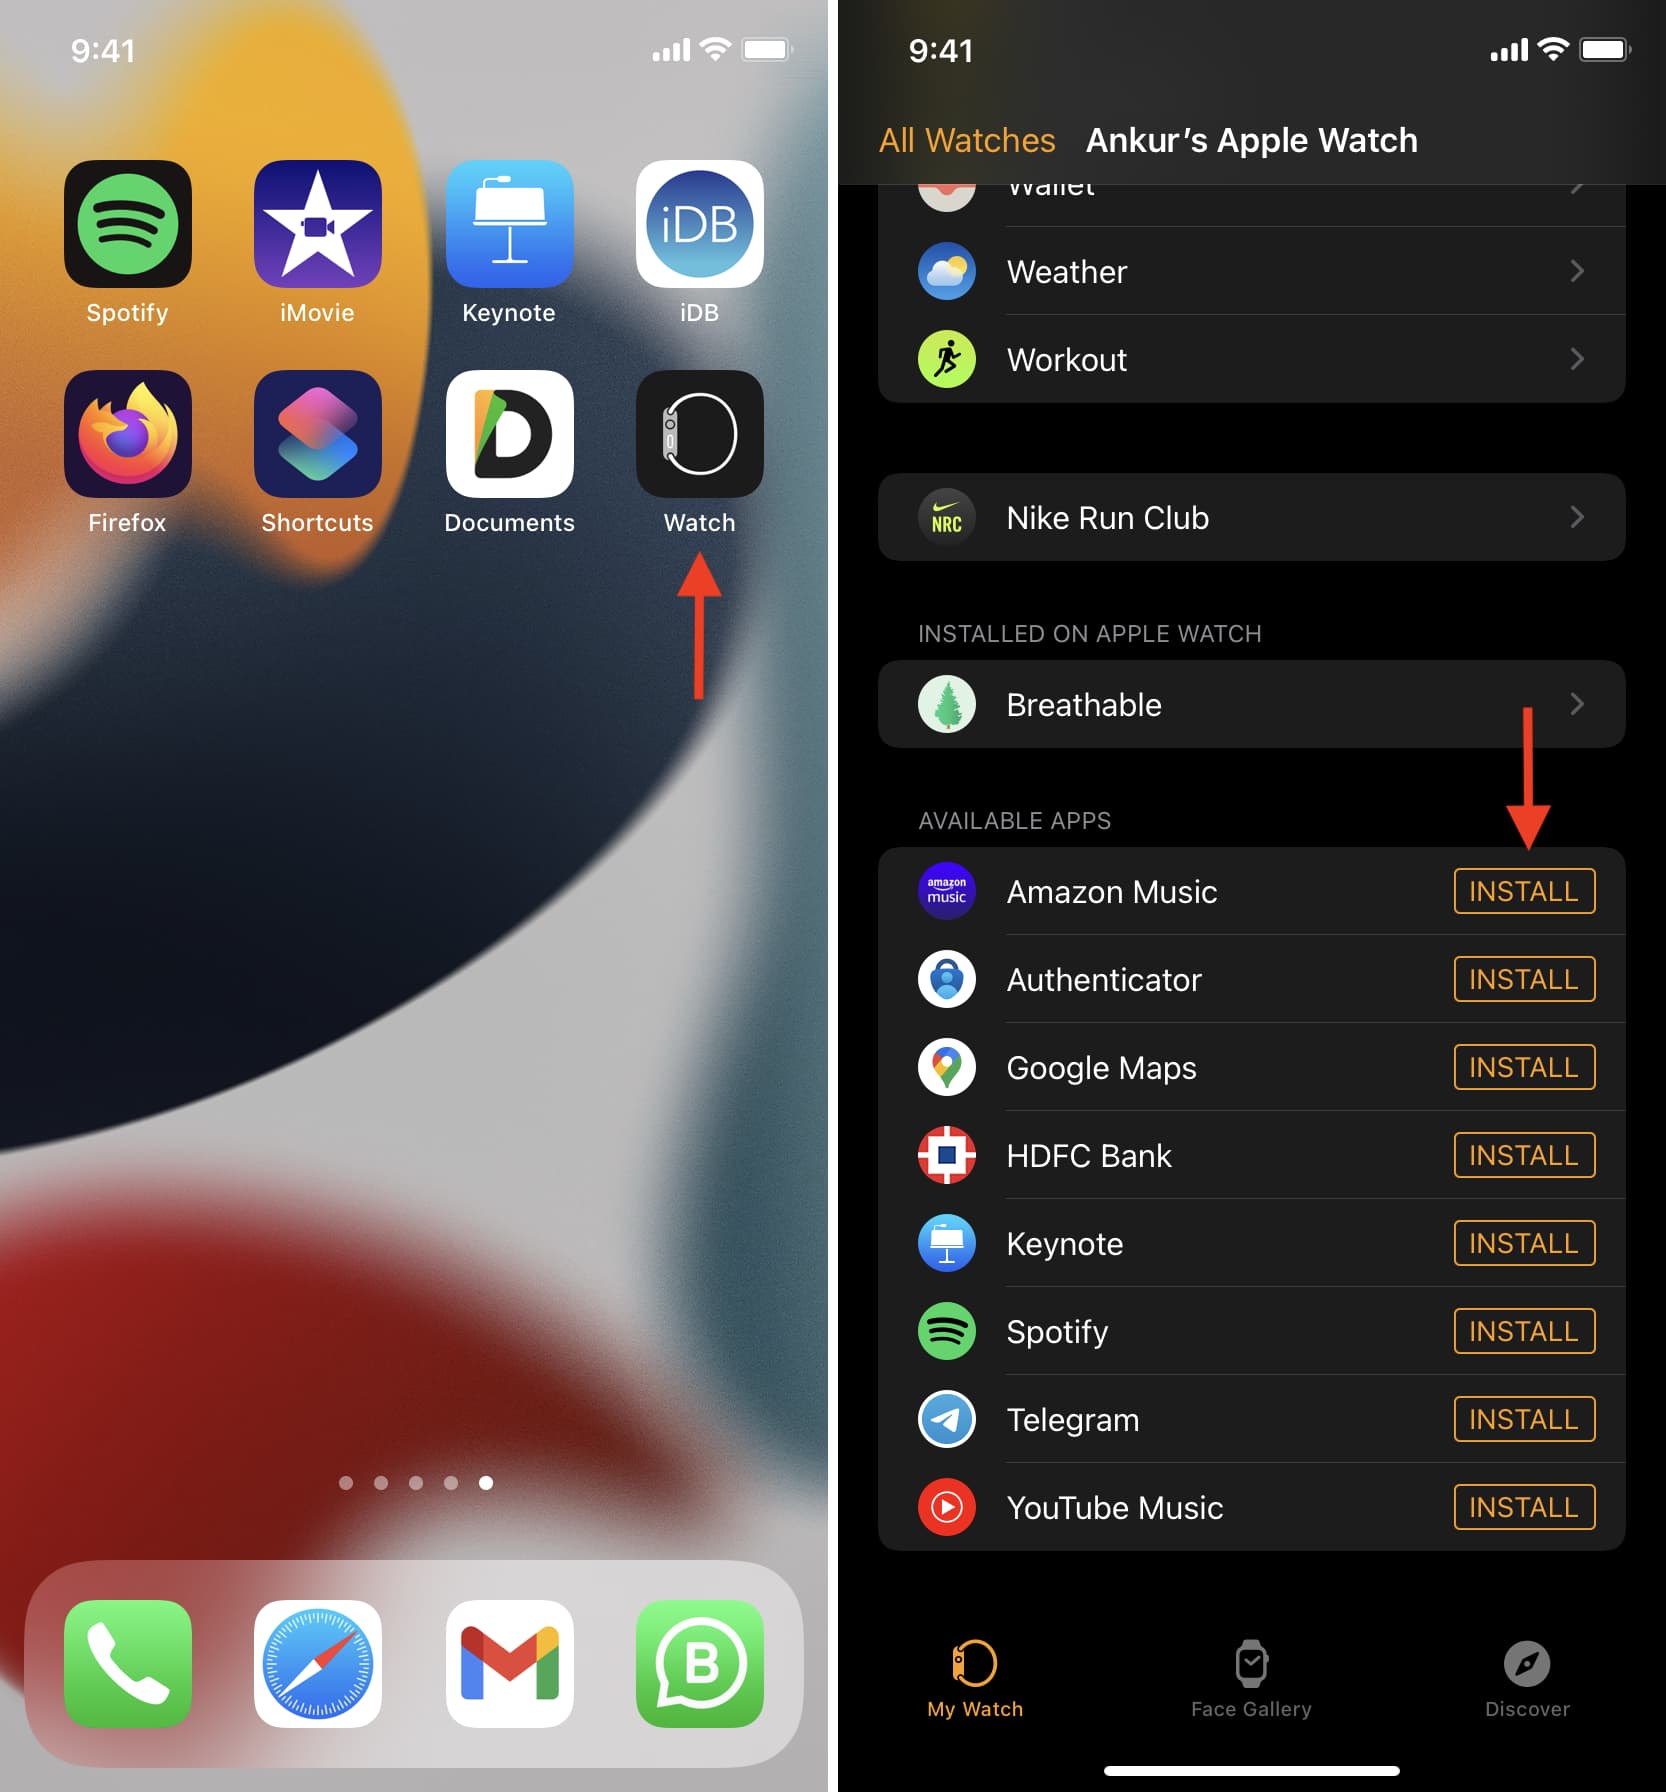 Install app on Apple Watch from the iPhone Watch app